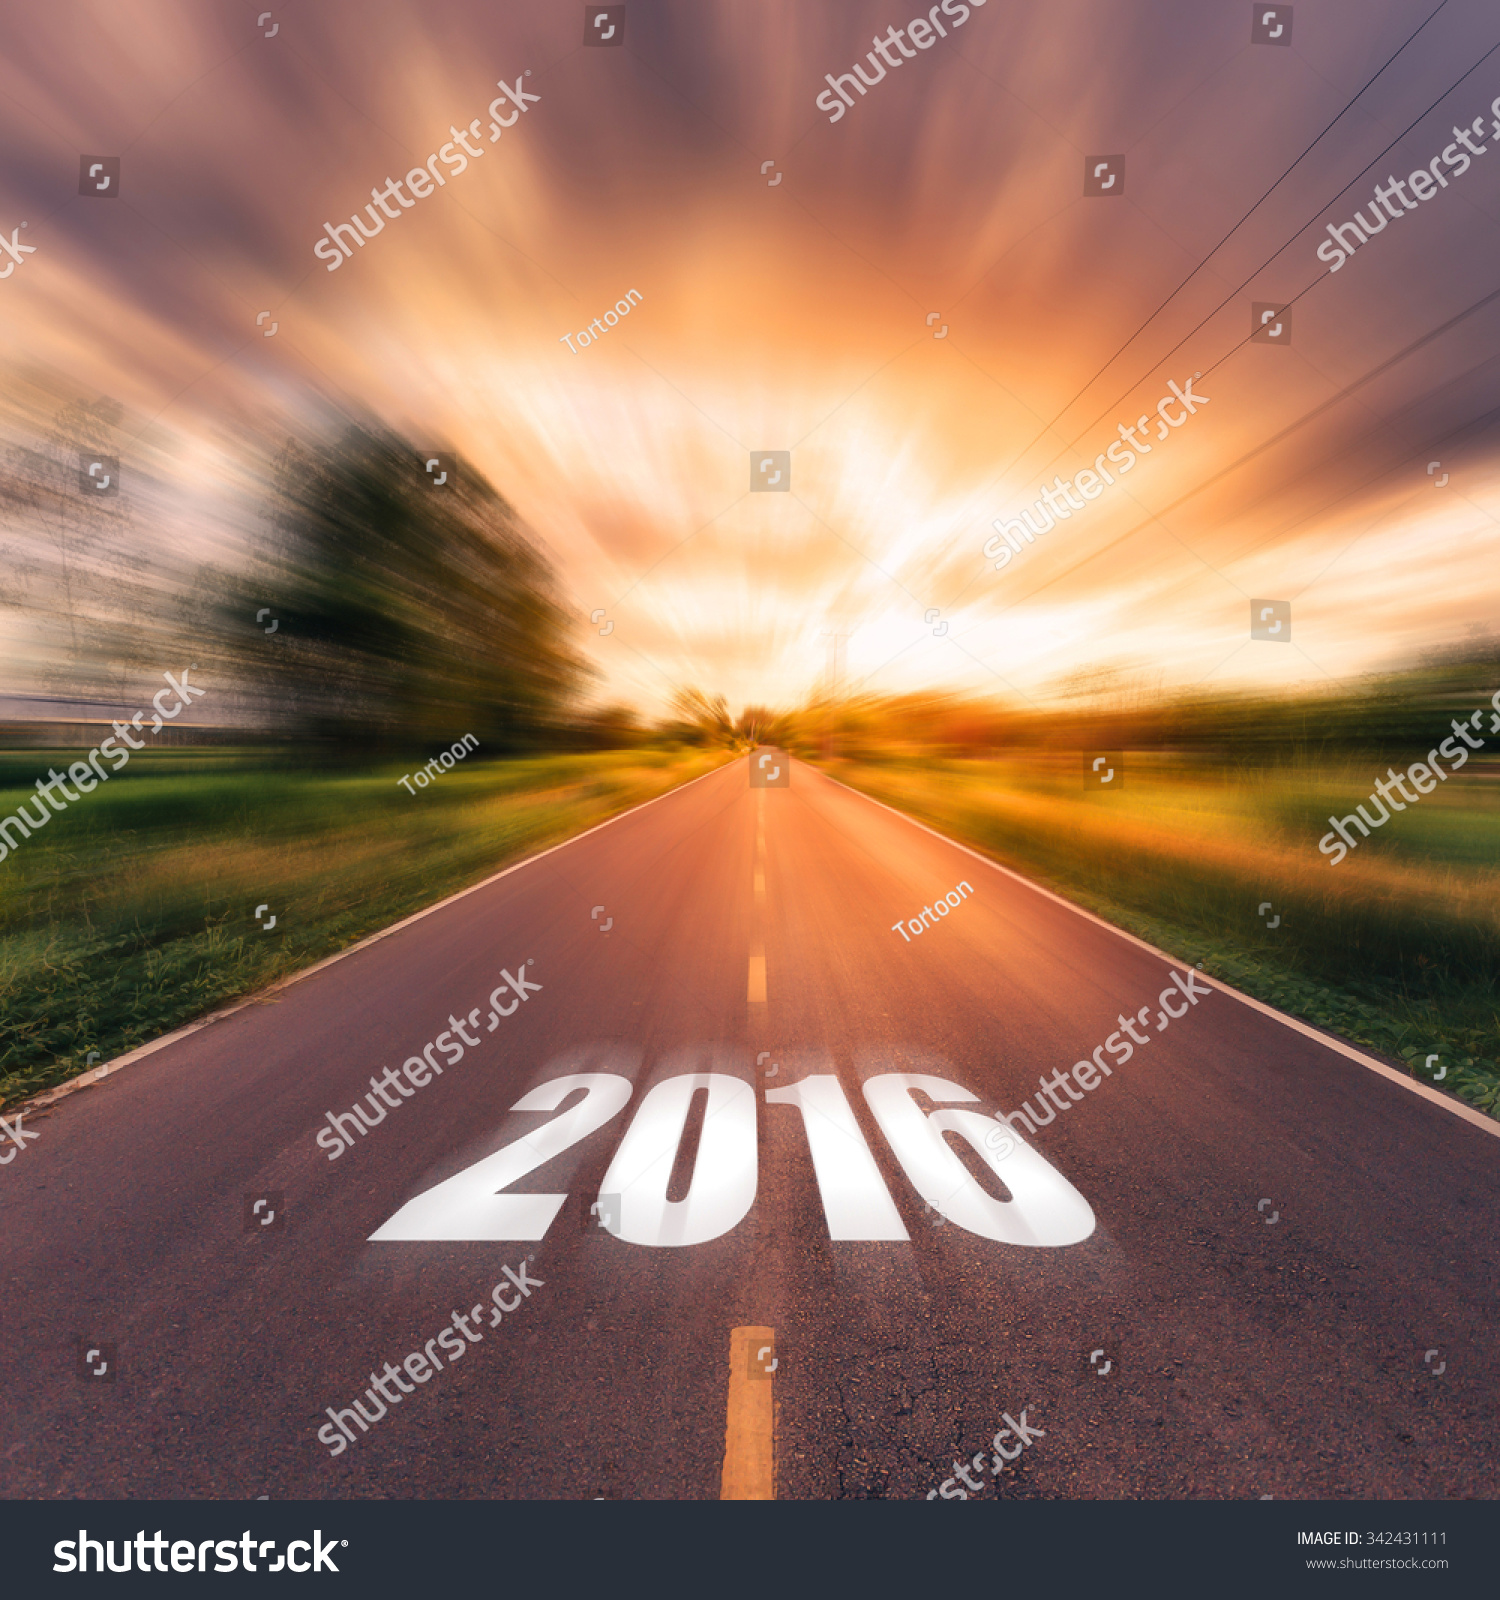 country road and field with beautiful sunset vintage. Forward to the New Year 2016. #342431111